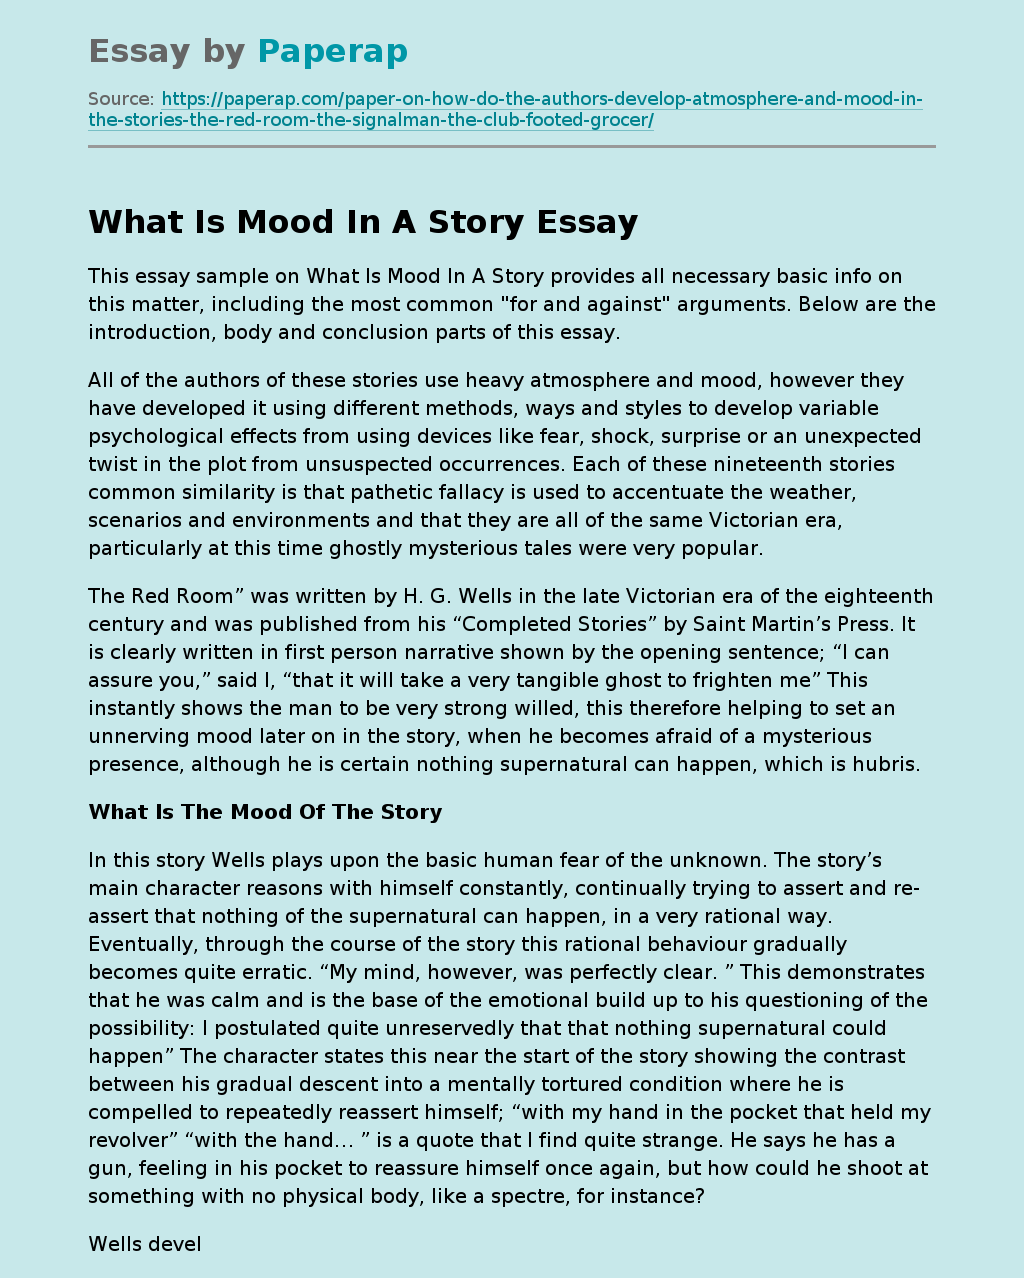 What Is Mood In A Story